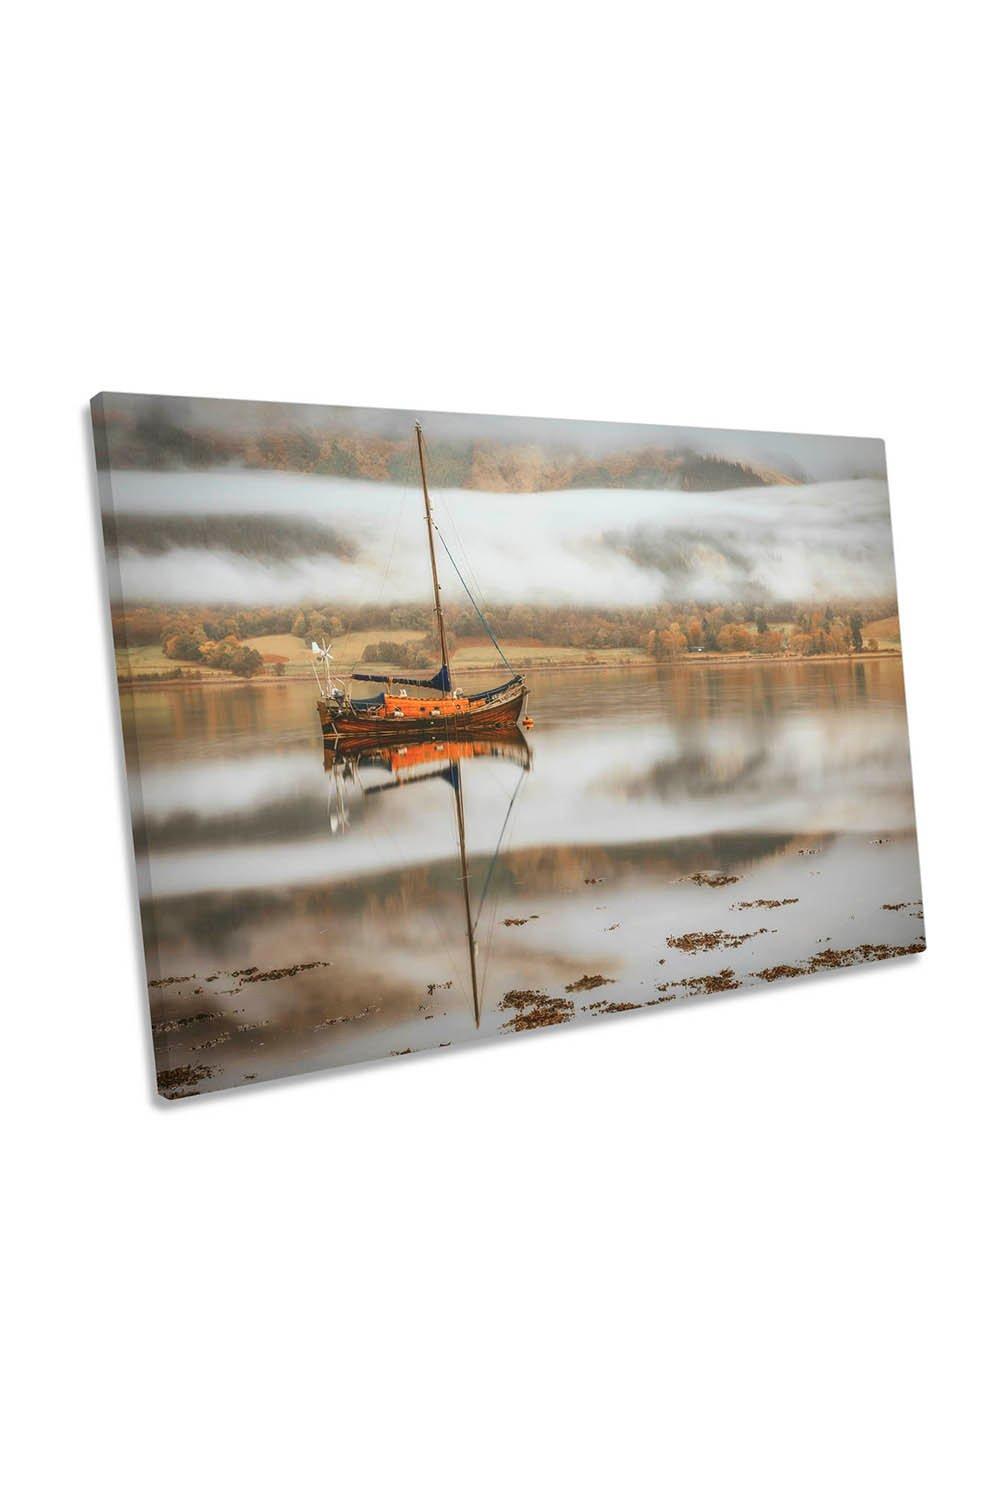 Sail Boat Misty Morning Lake Canvas Wall Art Picture Print